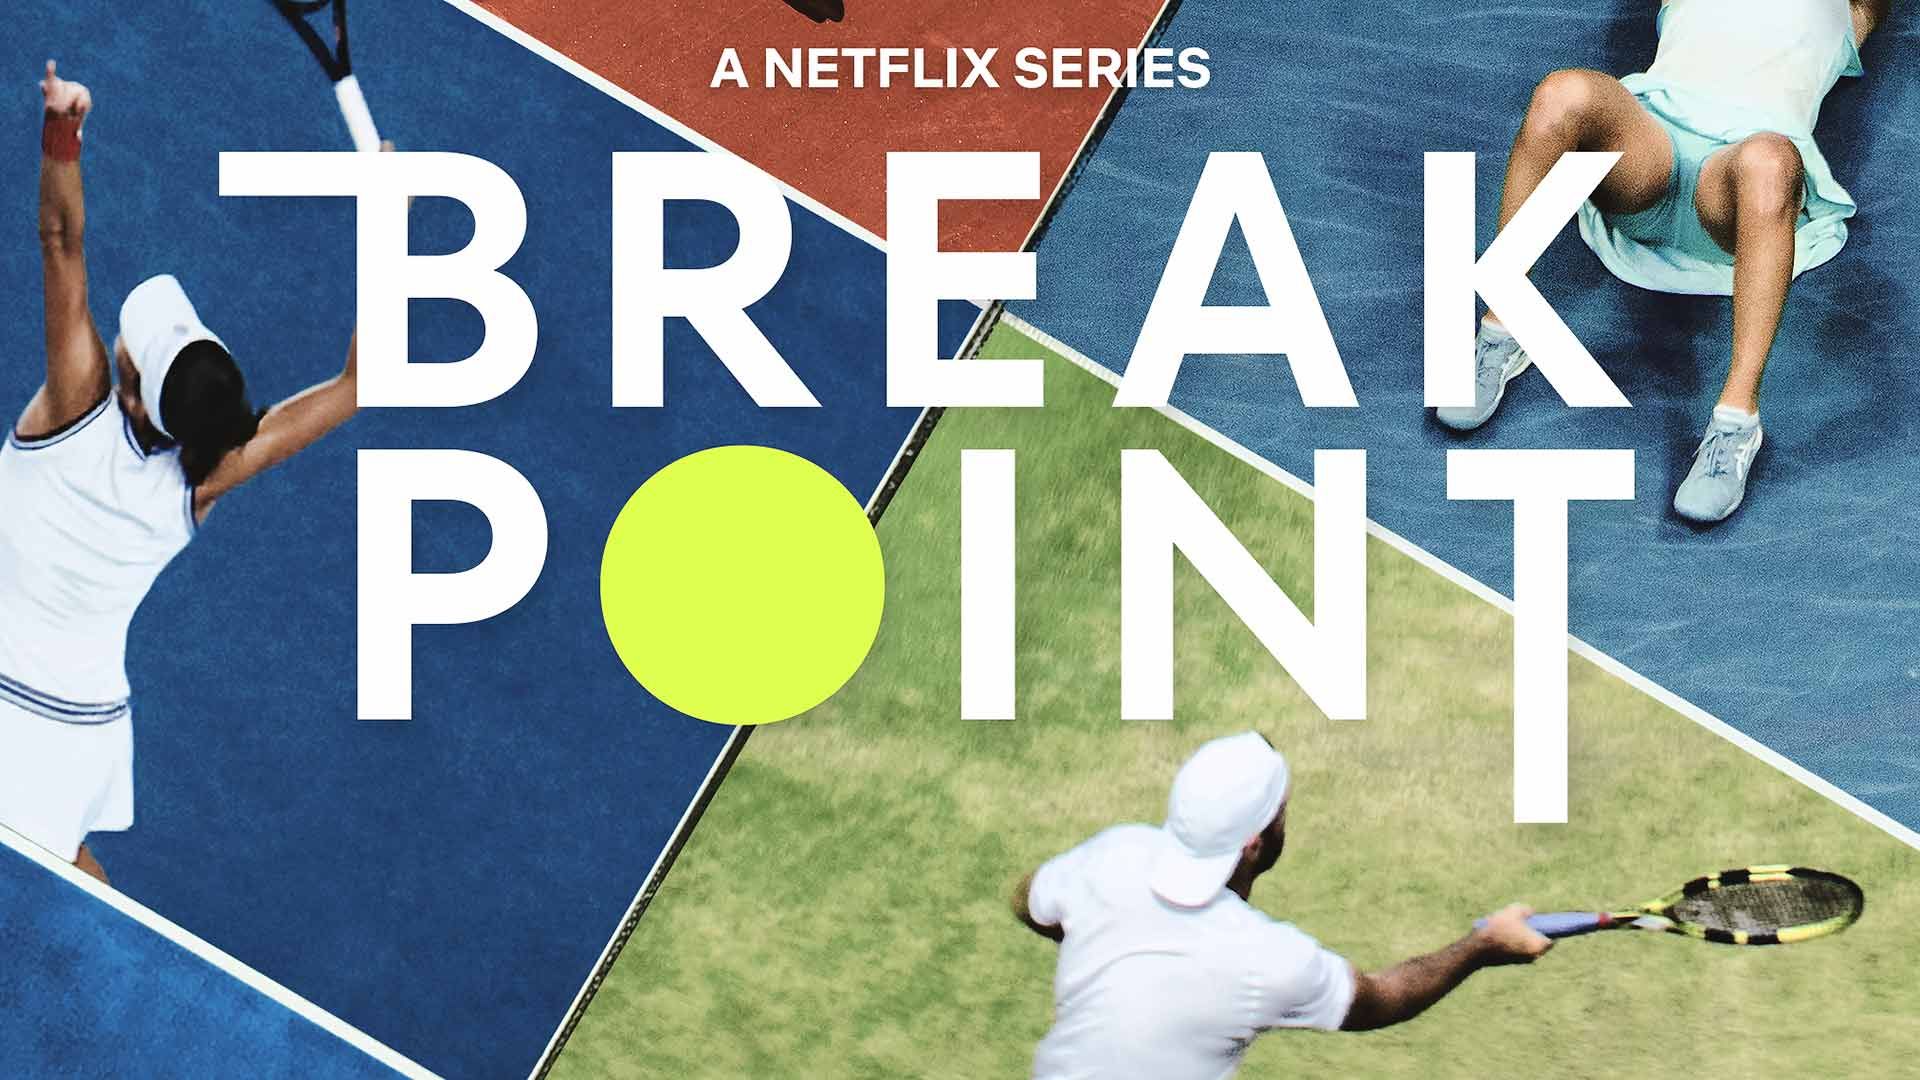 Netflix Taps 'Drive to Survive' Producer for Tennis Series